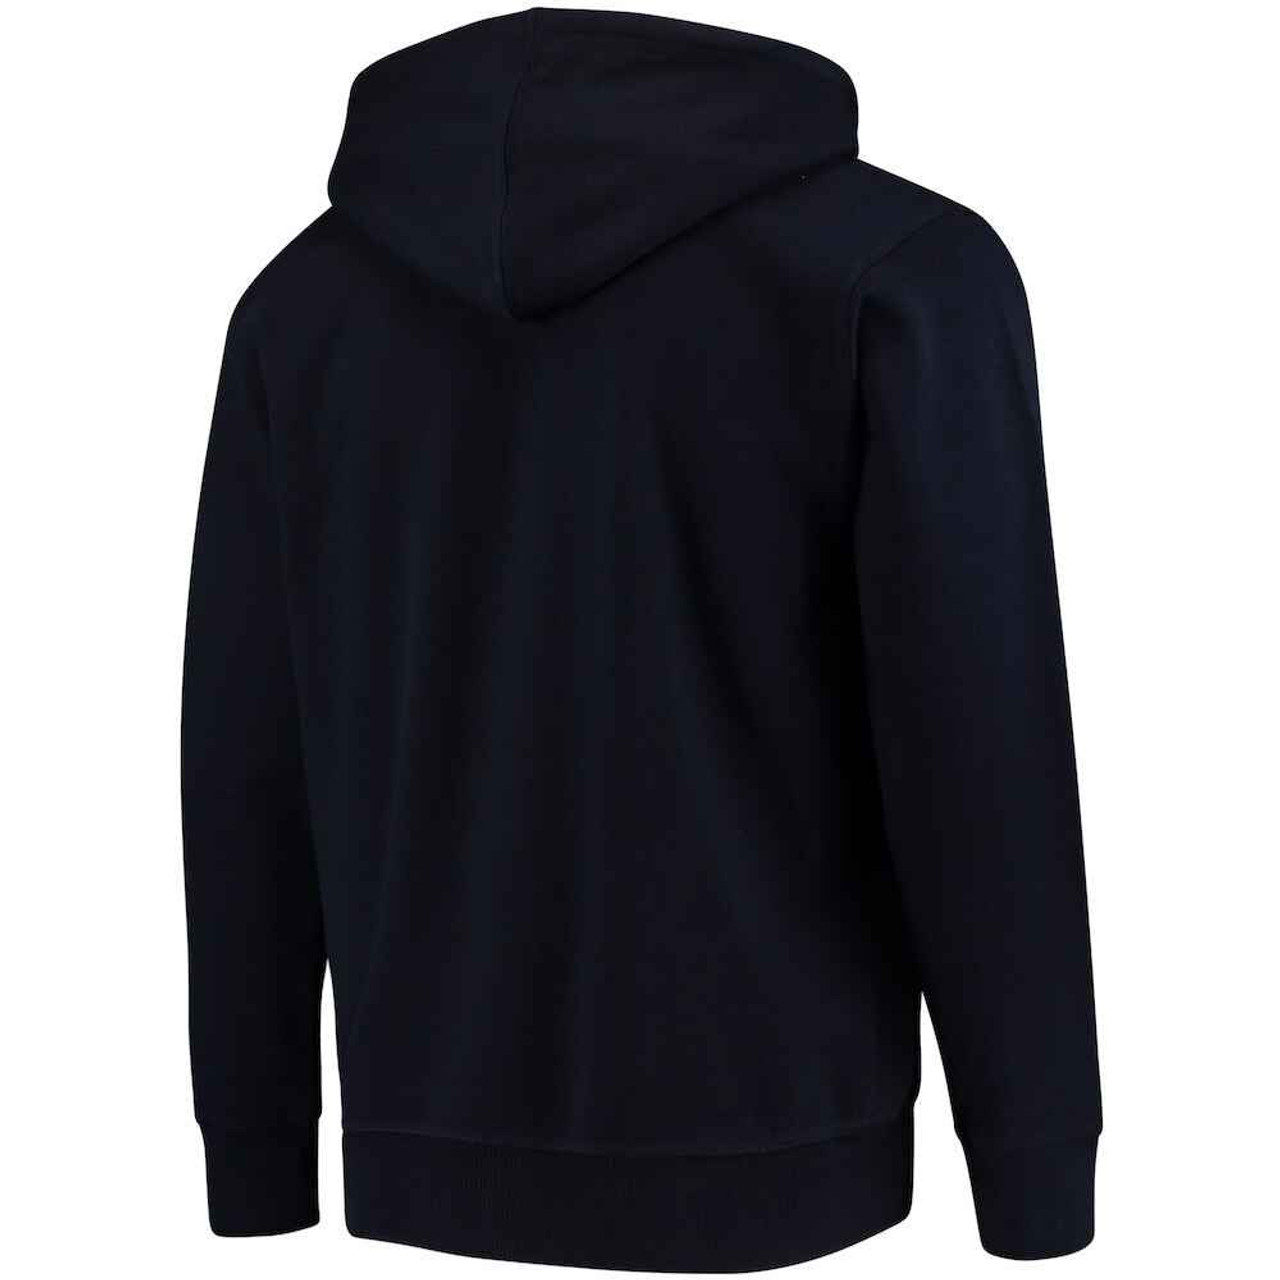 Chicago Bears Huddle Full-Zip Hoodie by Hands High